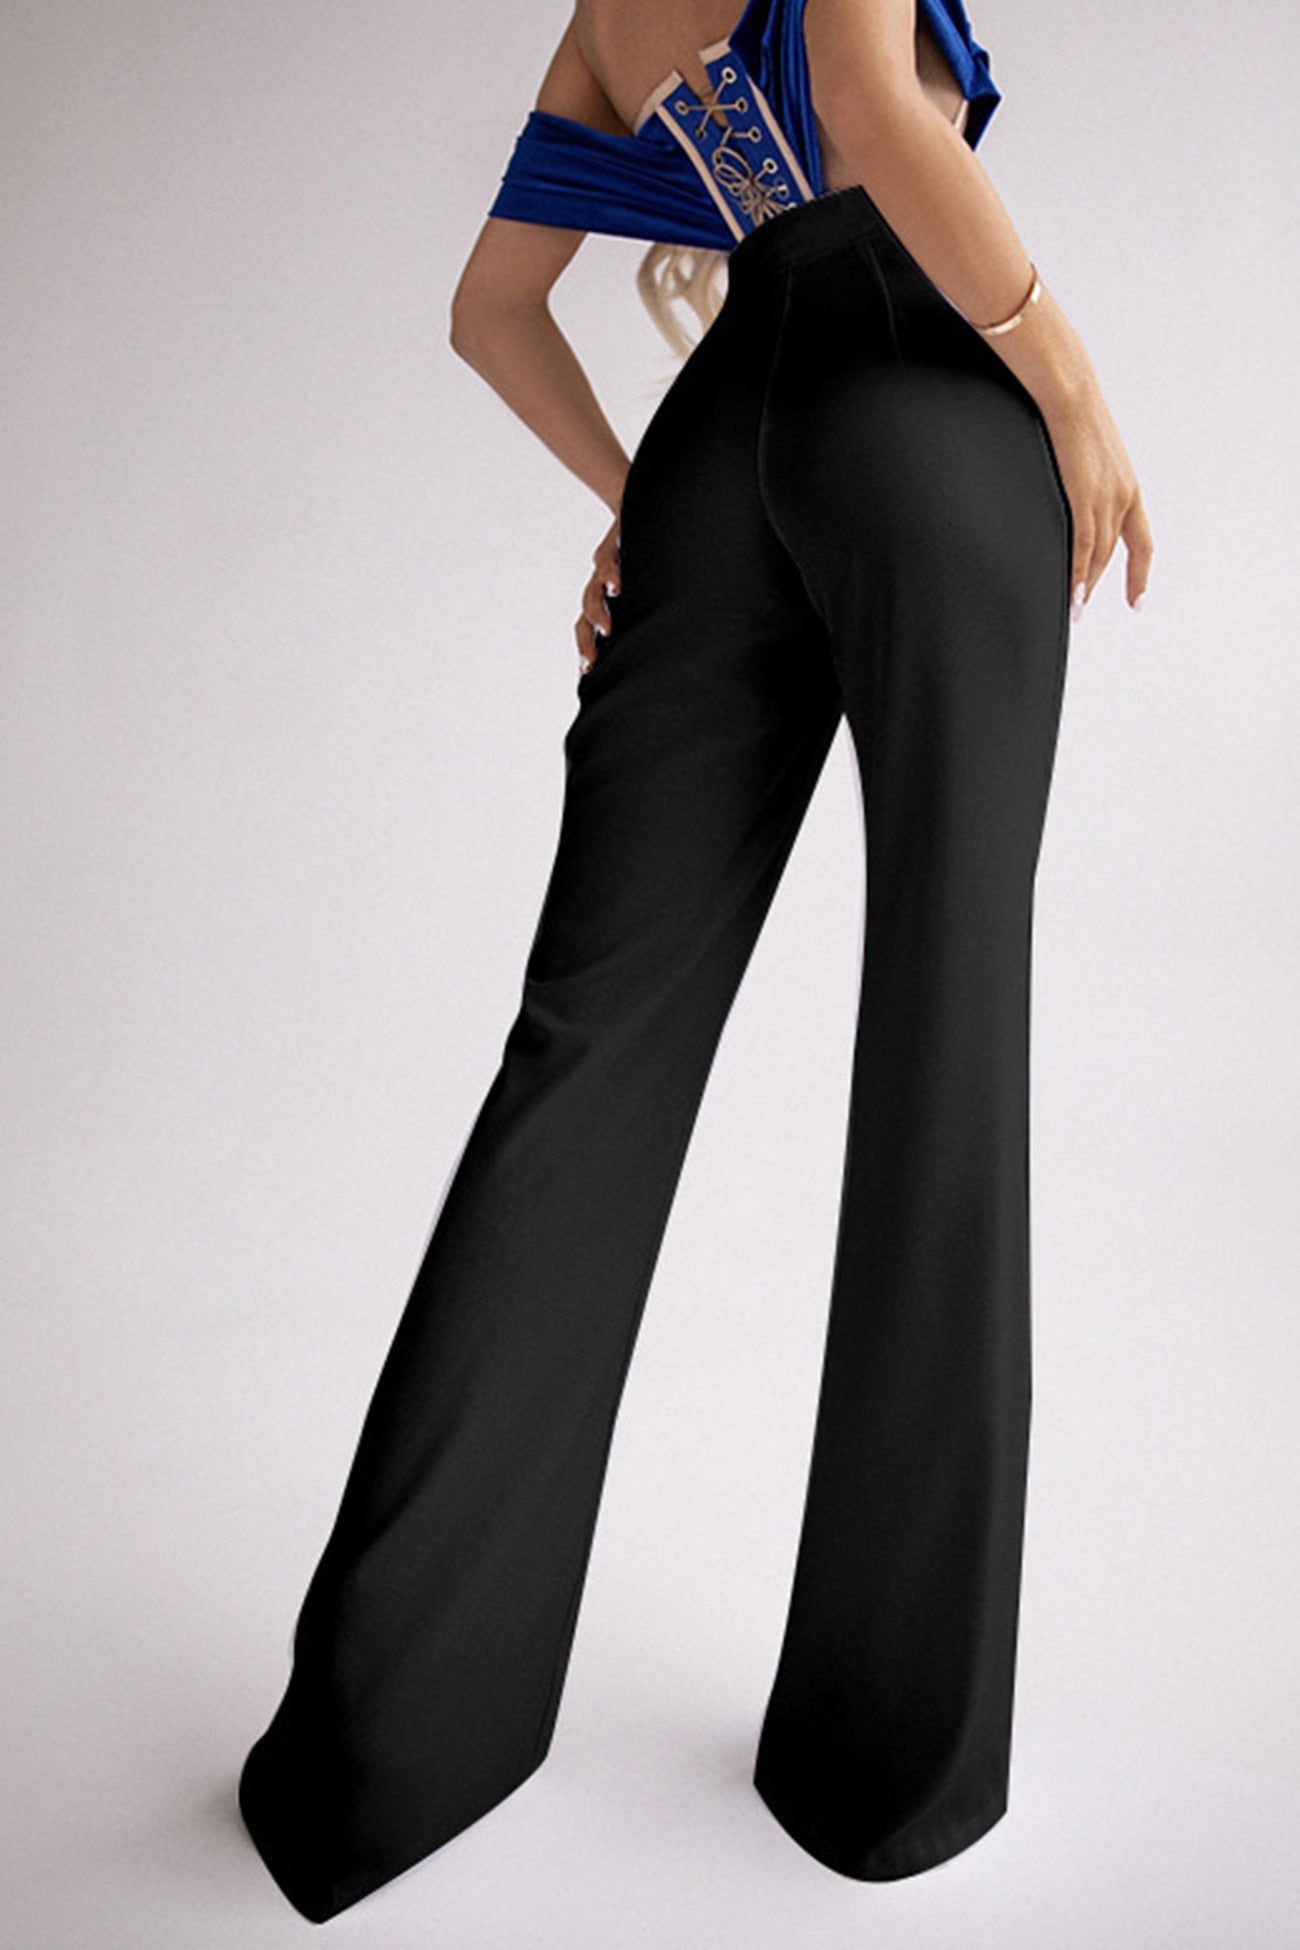 Glitter Hollow Out Patchwork Flares Long Pants